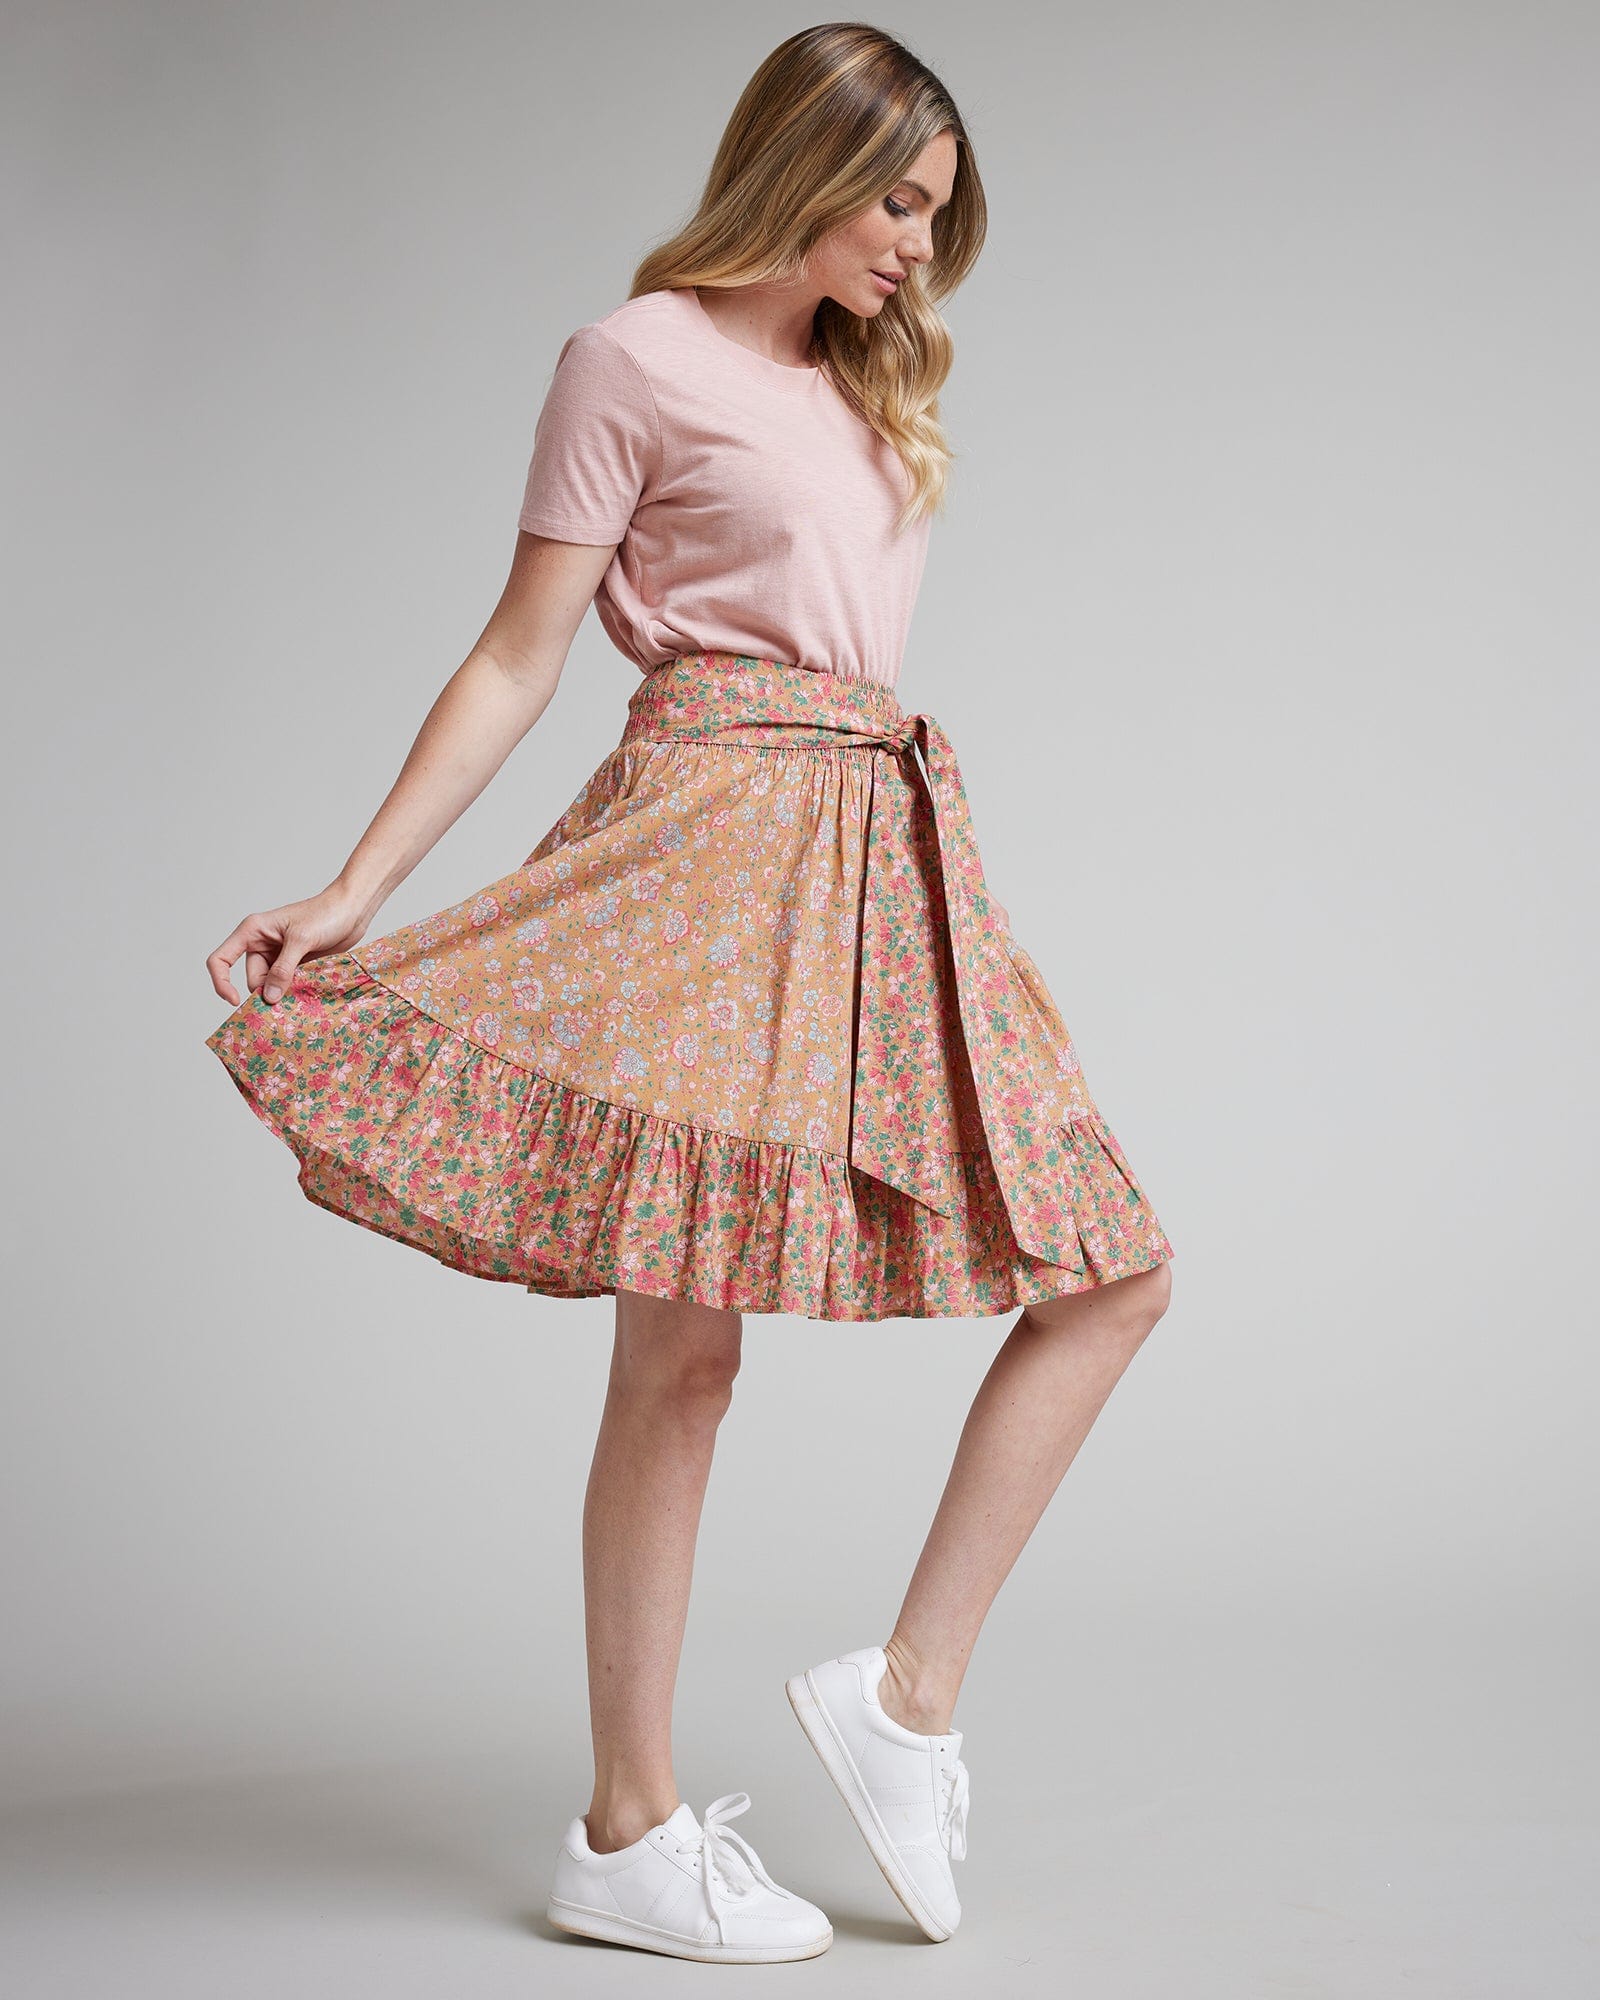 Woman in pink floral knee-length skirt